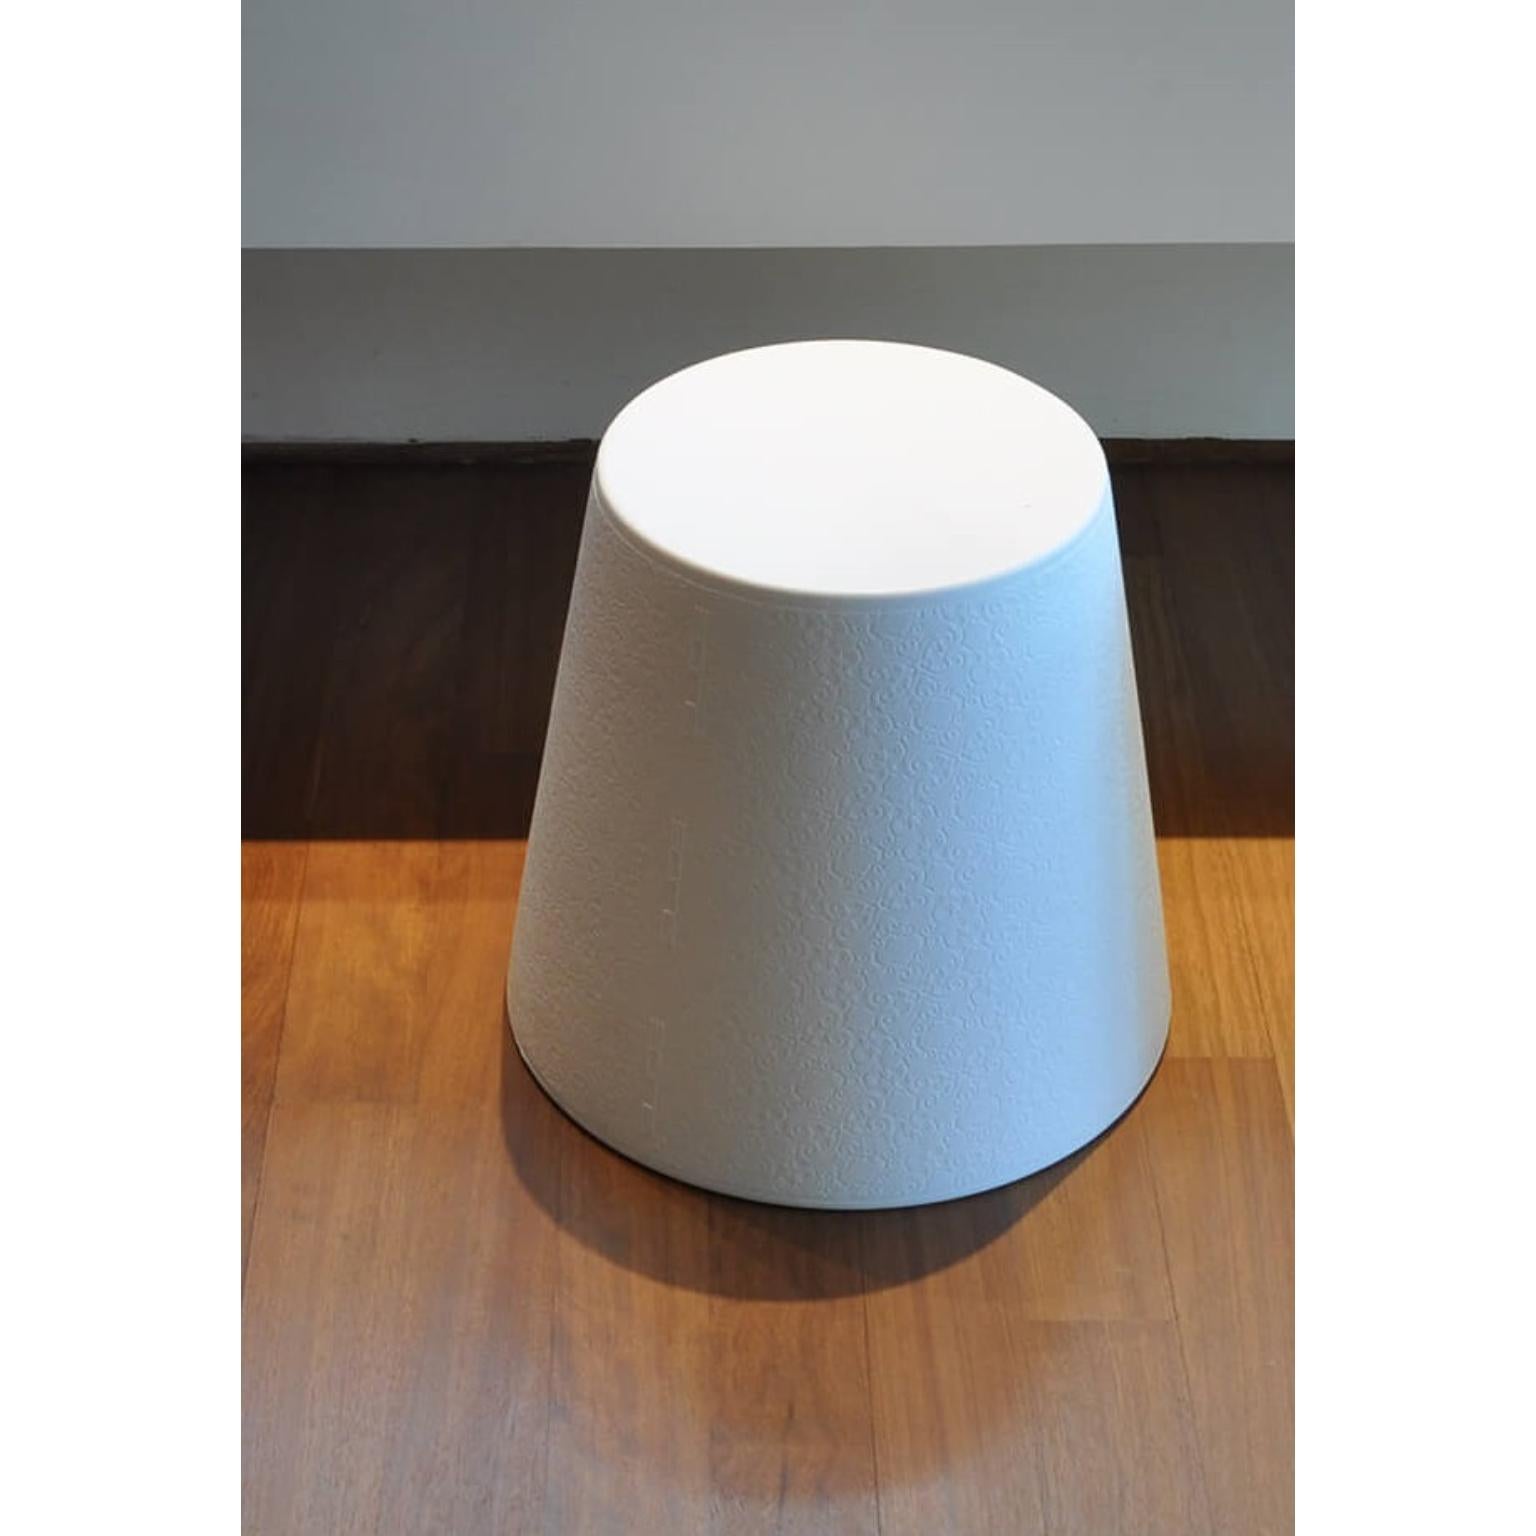 Light White LED Ali Baba Stool by Giò Colonna Romano
Dimensions: Ø 43 x H 41 cm.
Materials: Polyethylene.
Weight: 2,5 kg.

Available in a standard version and an LED version. Prices may vary. Available in different color options. This product is